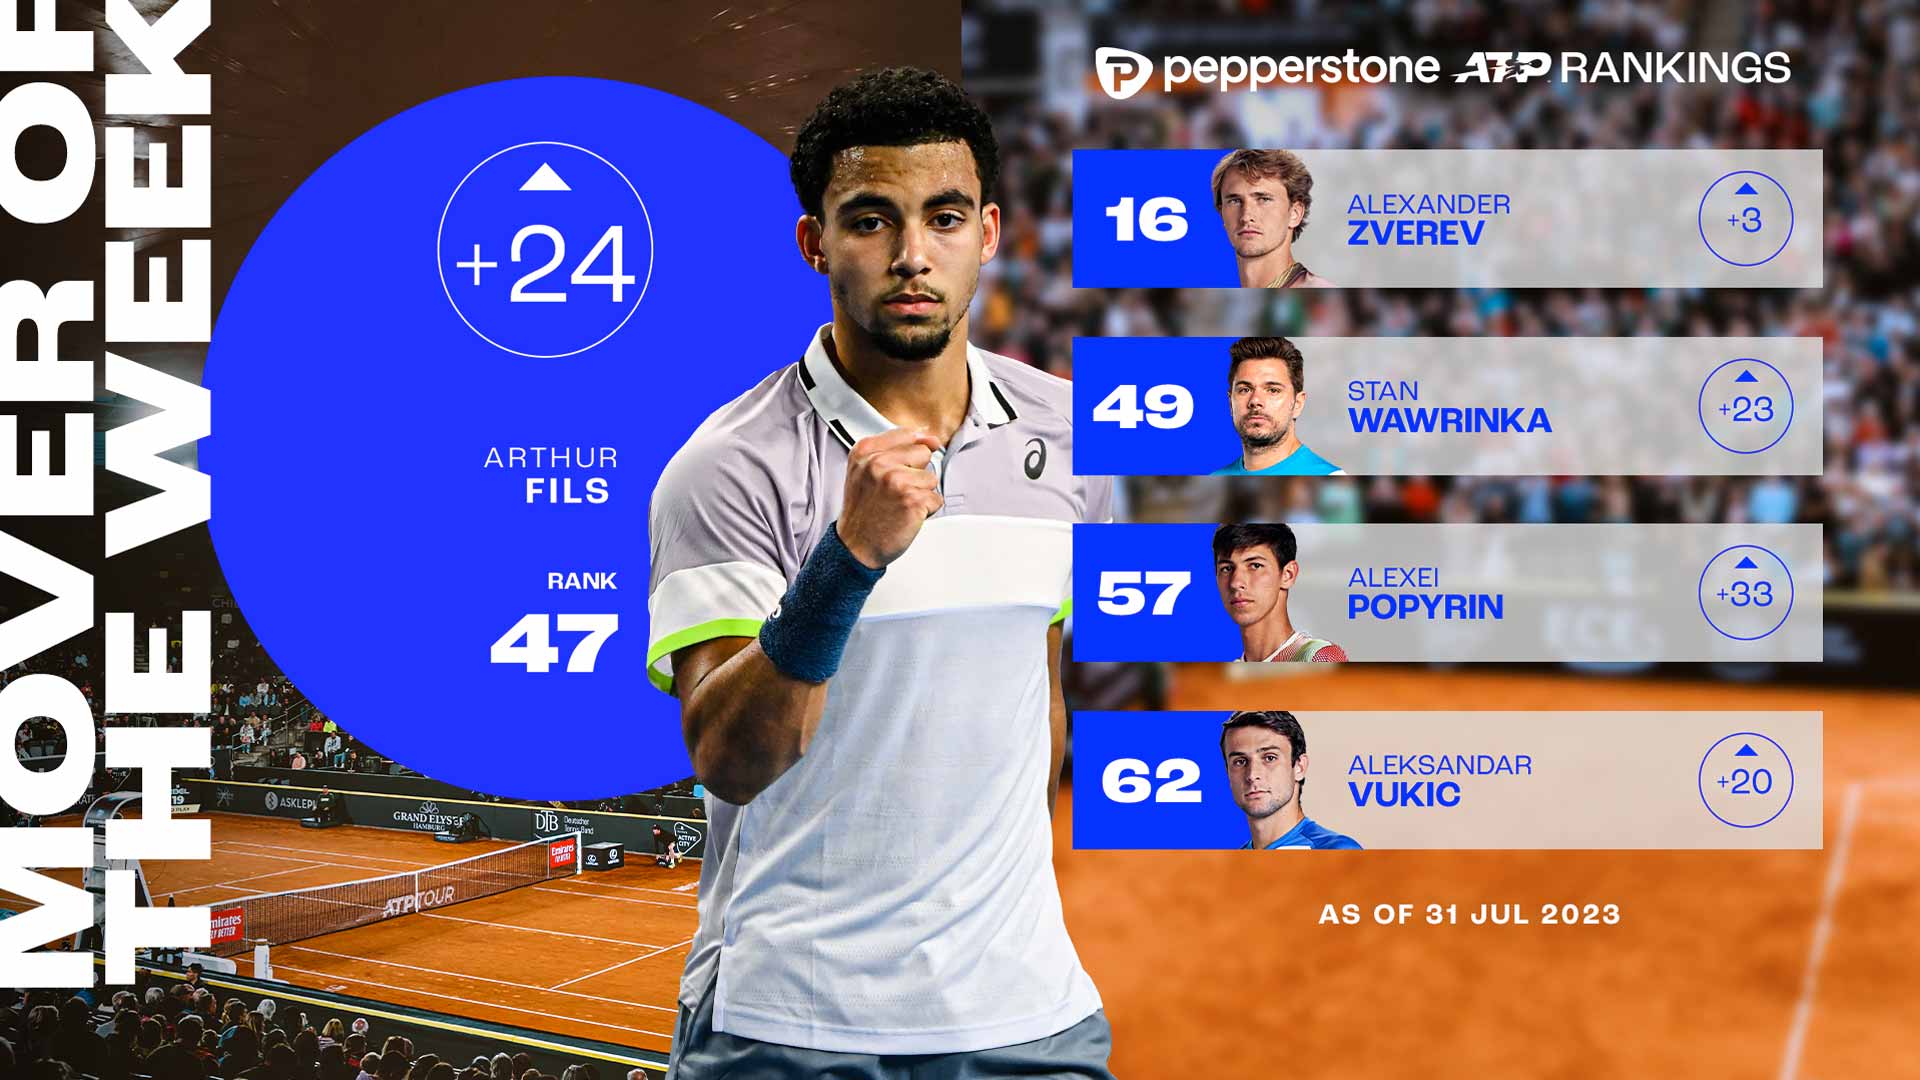 Arthur Fils broke the Top 50 of the Pepperstone ATP Rankings after reaching his maiden ATP 500 semi-final in Hamburg.